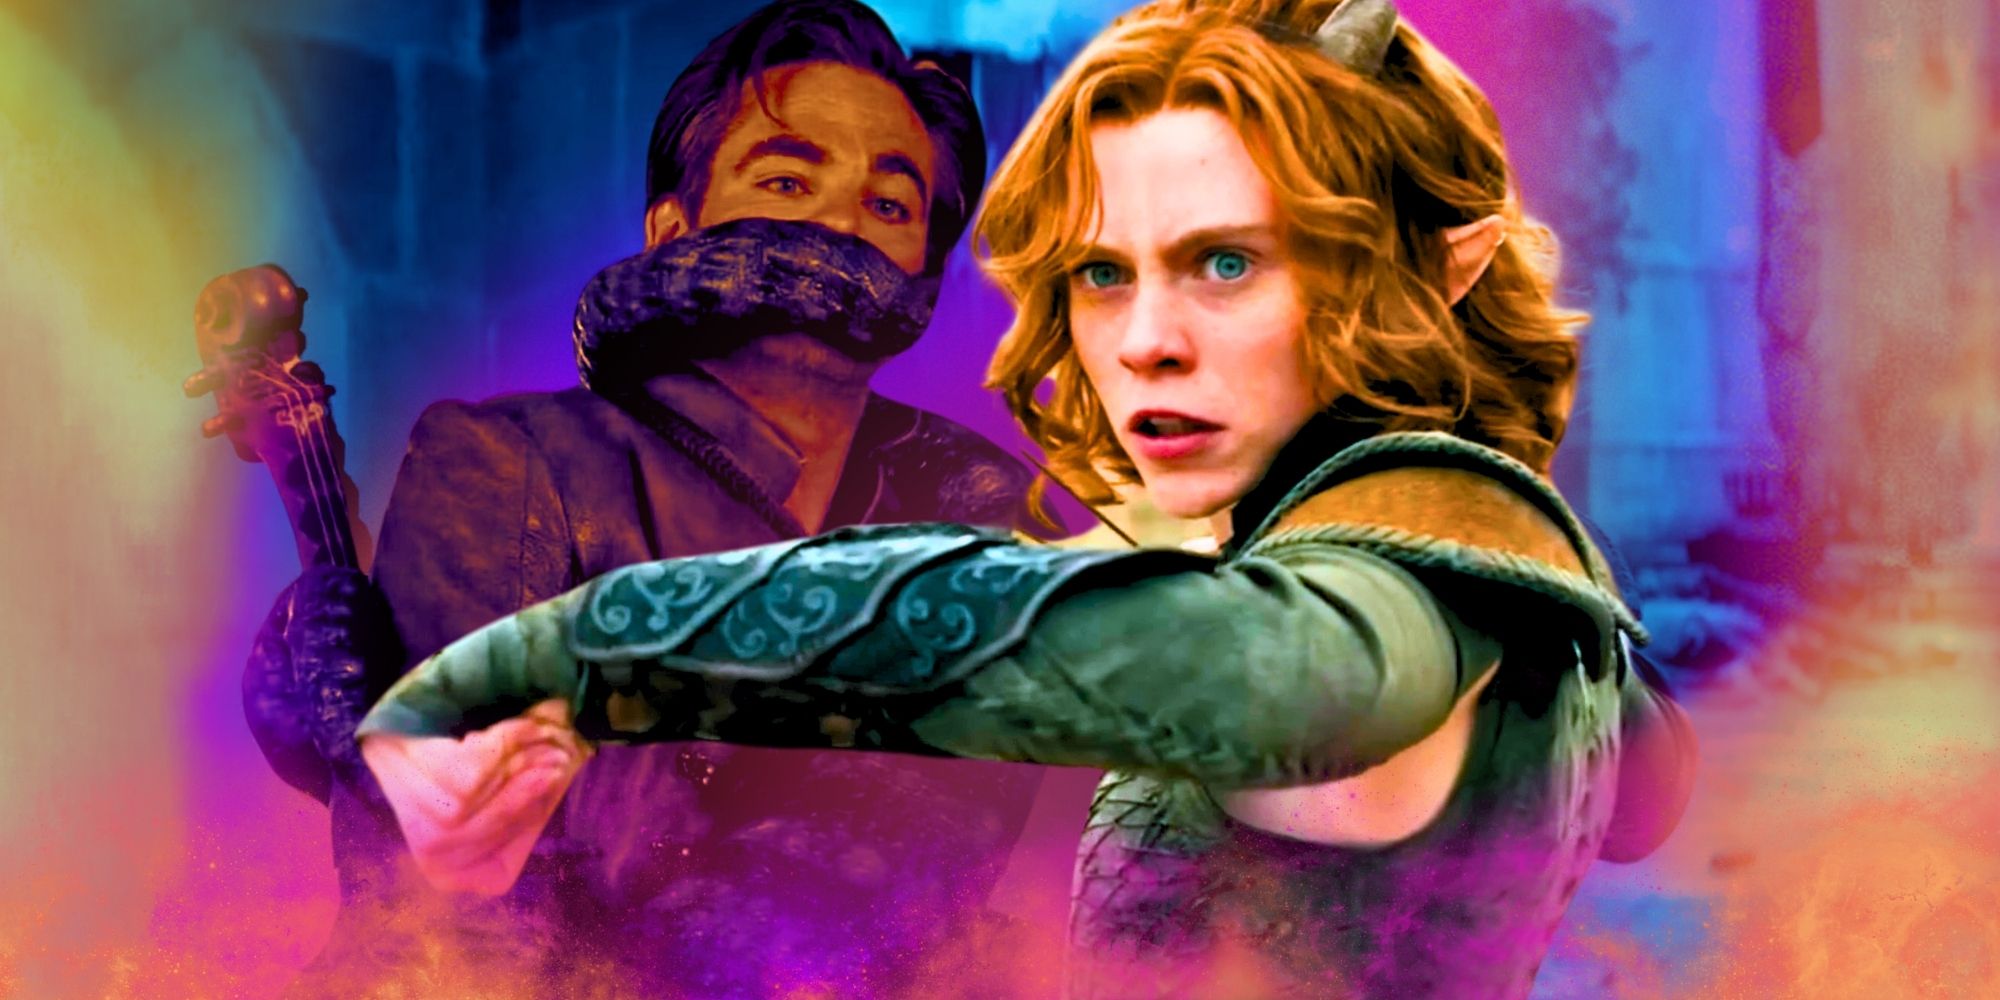 A custom image of Chris Pine's Edgin Darvis and Sophia Lillis' Doric from Dungeons & Dragons: Honor Among Thieves